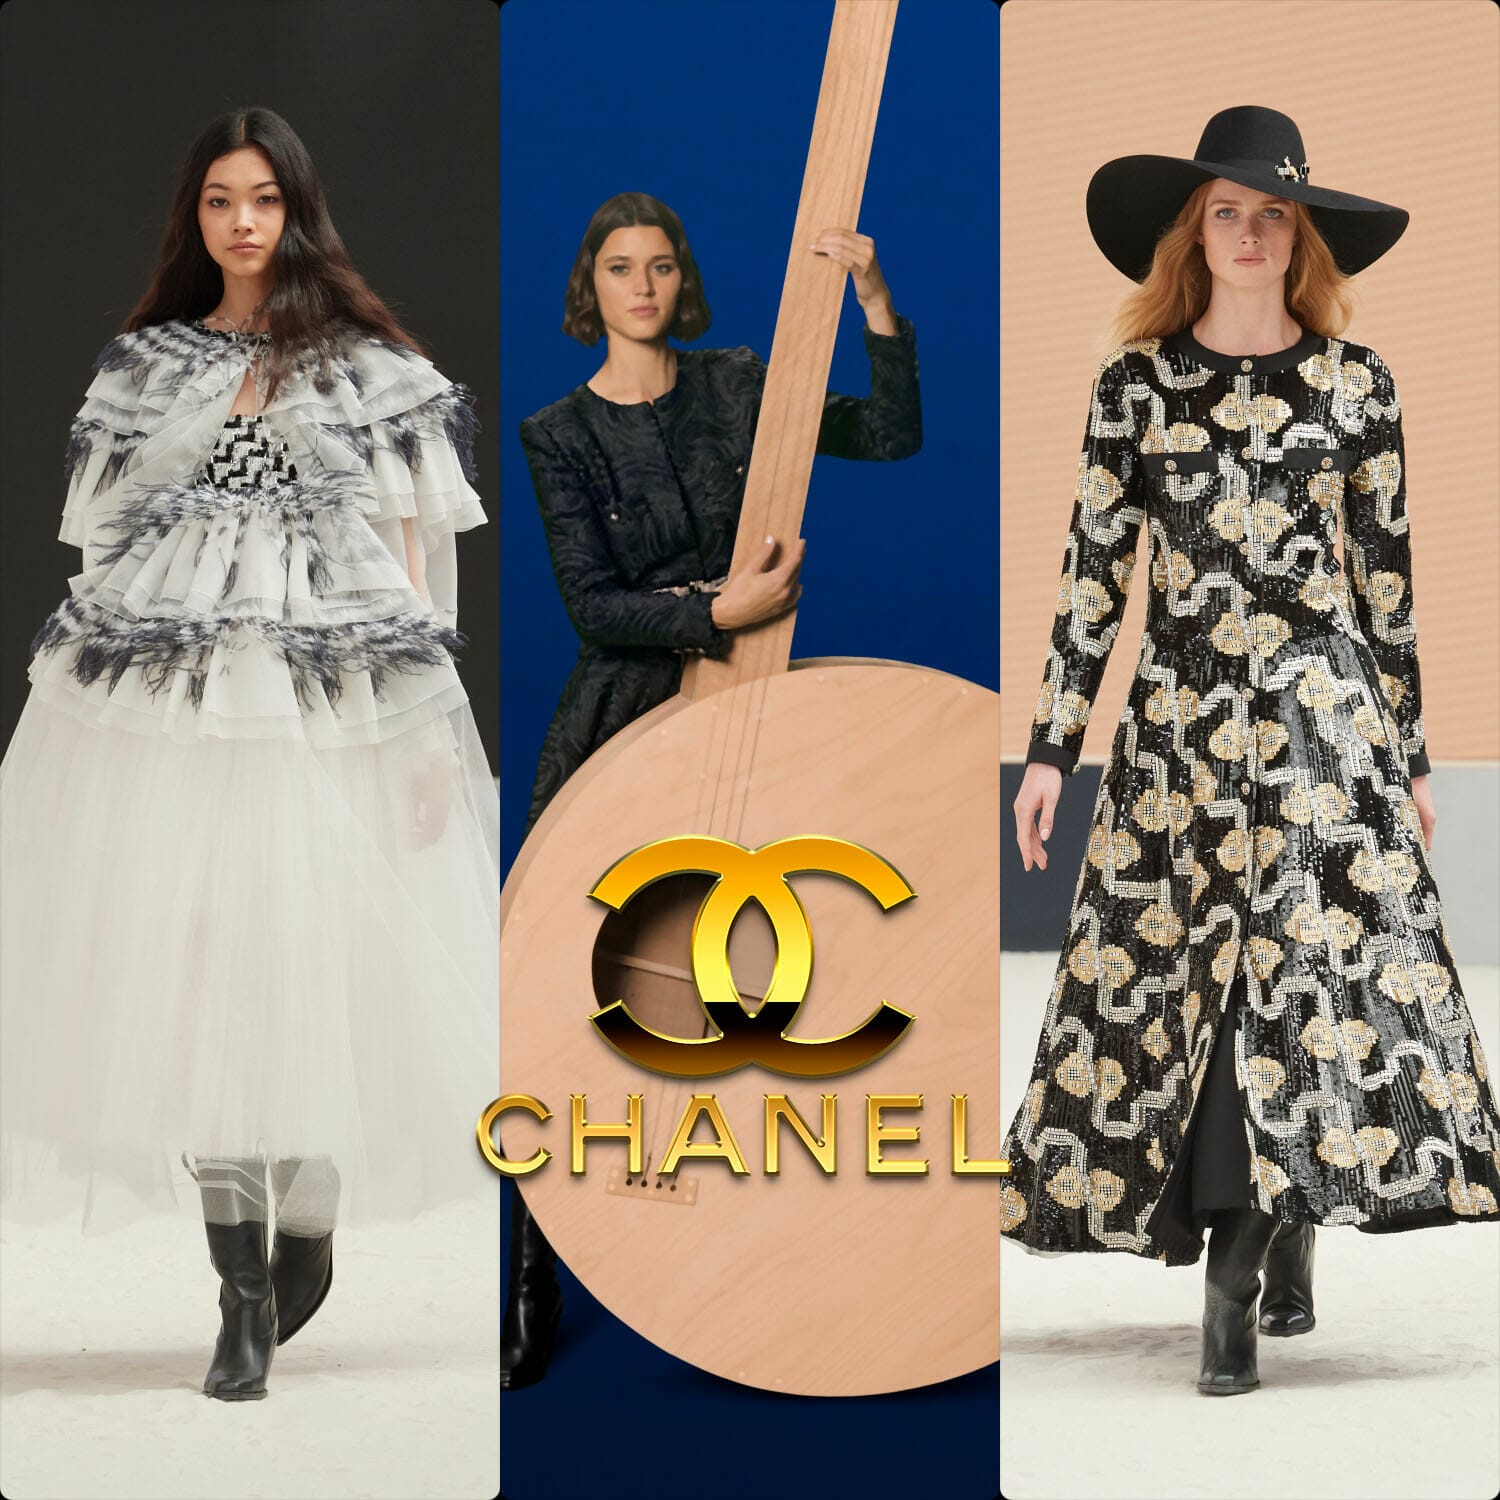 CHANEL EQUINOX FALL-WINTER 2023 COLLECTION 5 LOOKS, SWATCHES